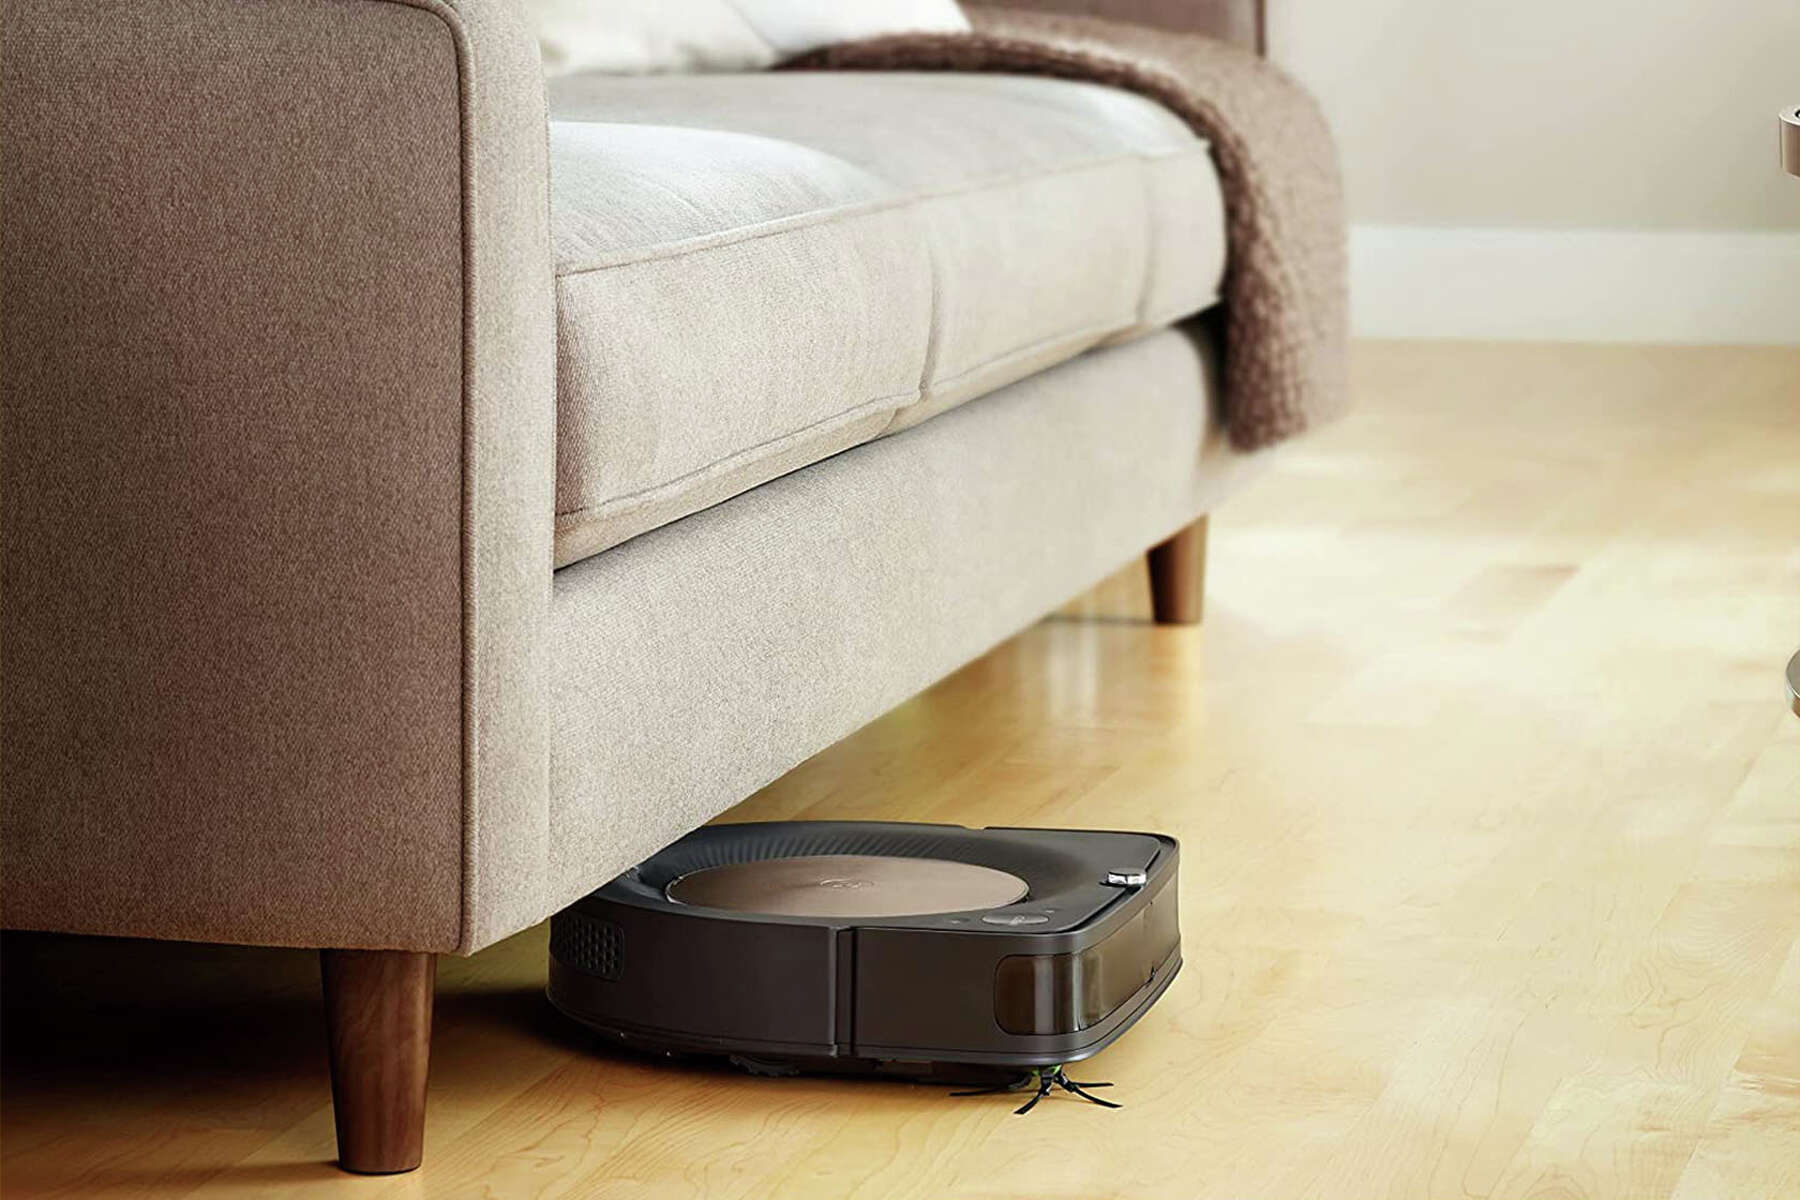 Get the Roomba s9+ for $300 off on  right now